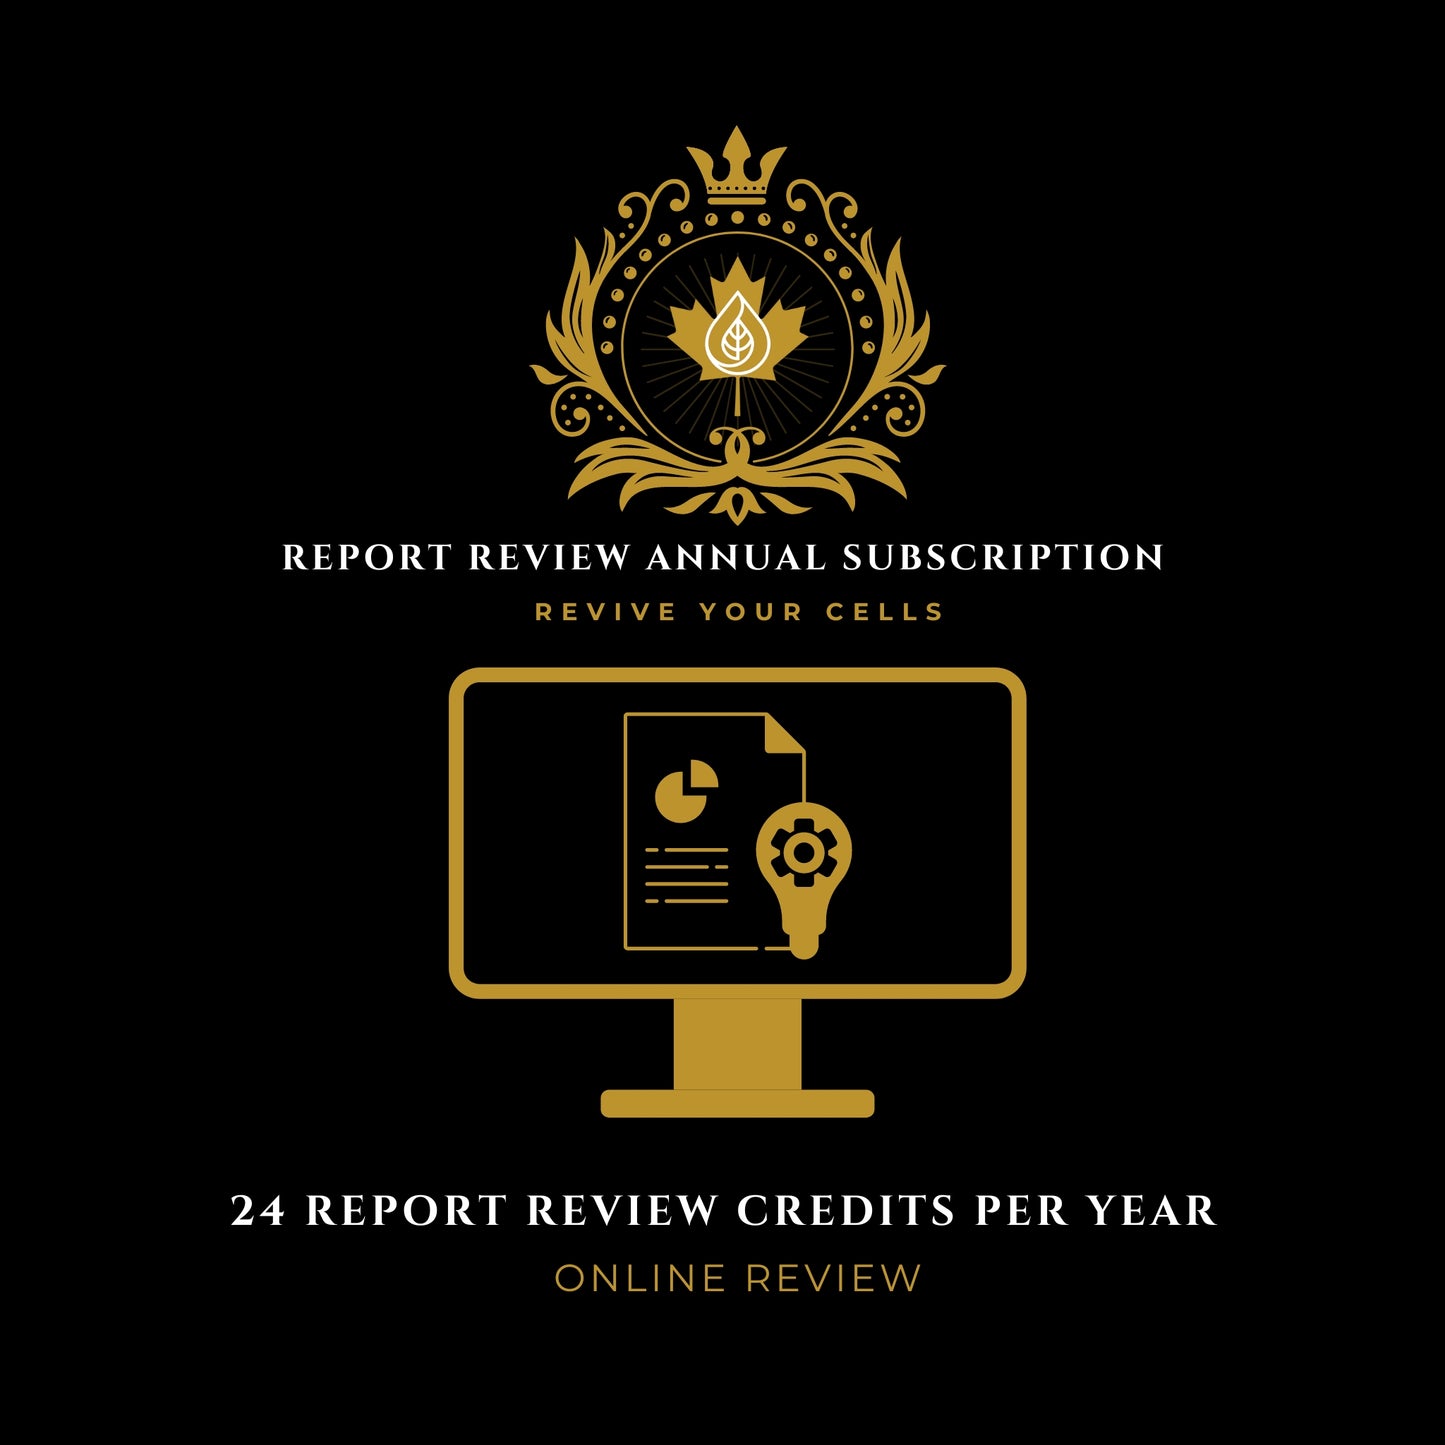 Epigenetic Hair Analysis Three Report Review Credits Annual Subscription - ReviveYourCells